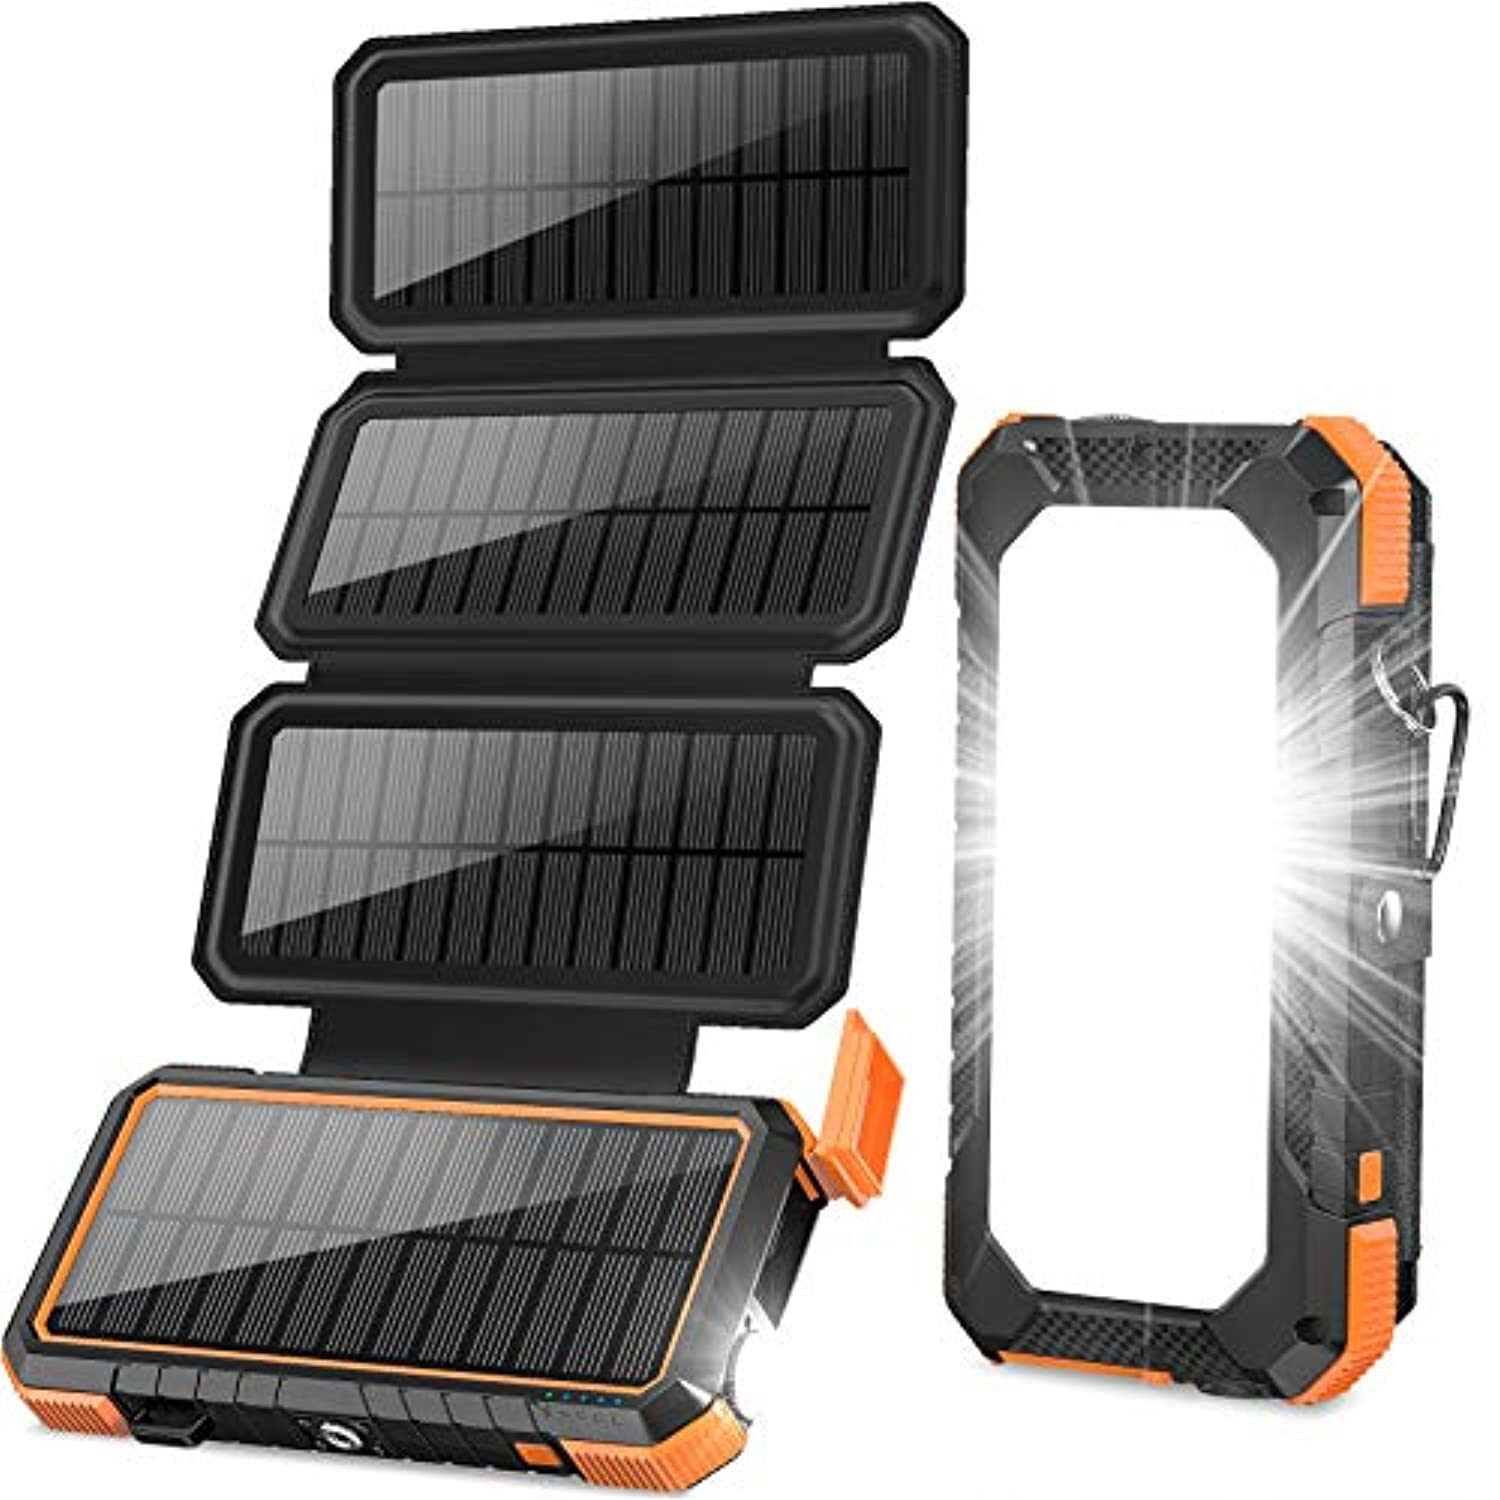 Image of Solar Charger with Foldable Panels, 18W Fast Charging, 20,000mAh with Camping Light/Flashlight/Compass Type C USB Charger 3 Outputs